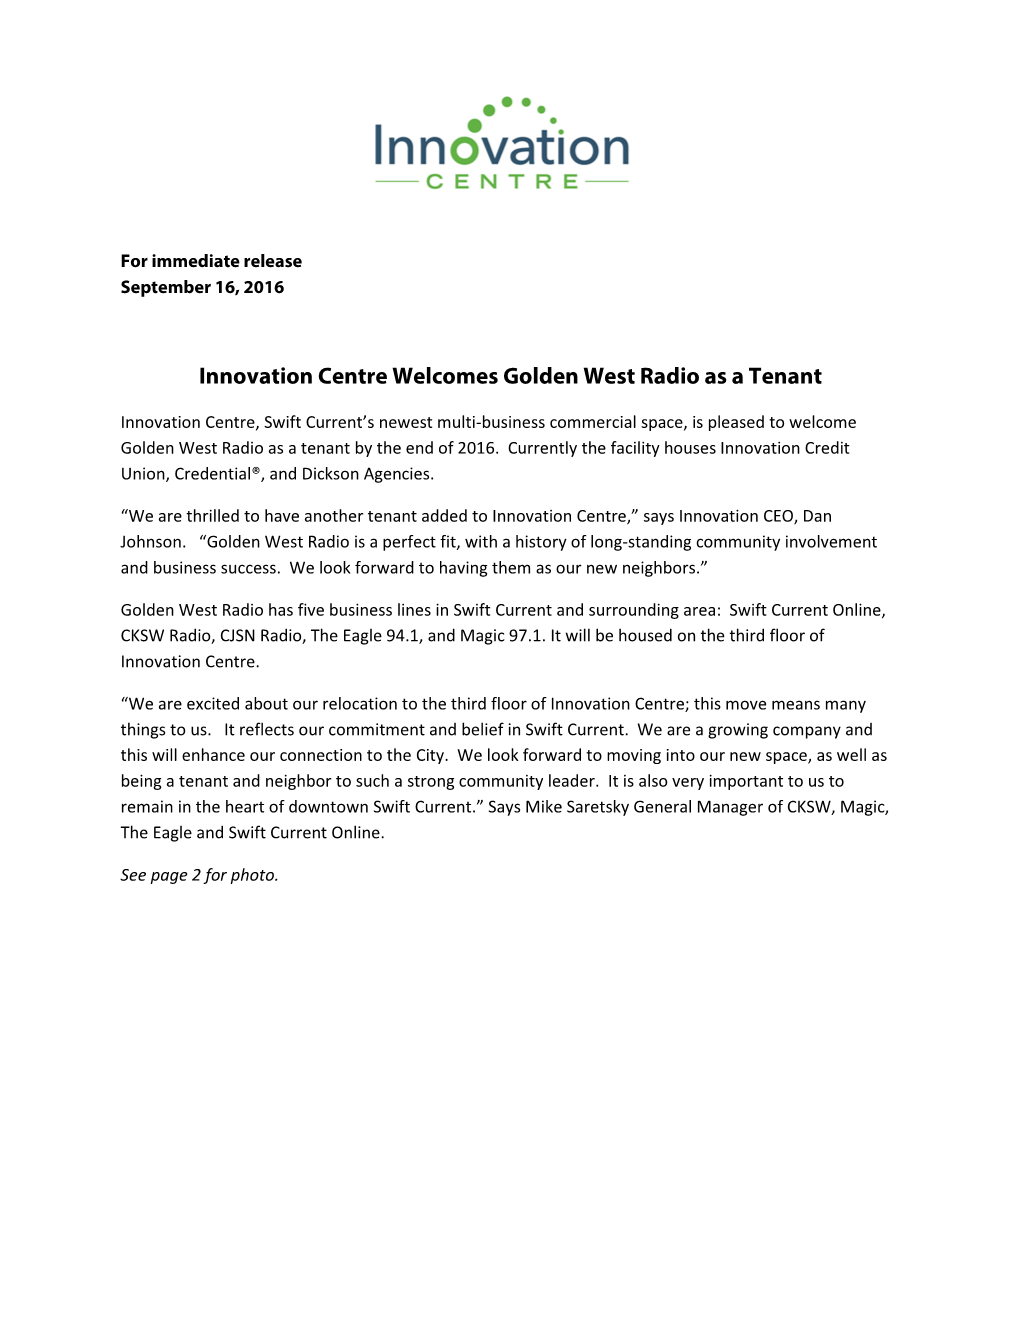 Innovation Centre Welcomes Golden West Radio As a Tenant